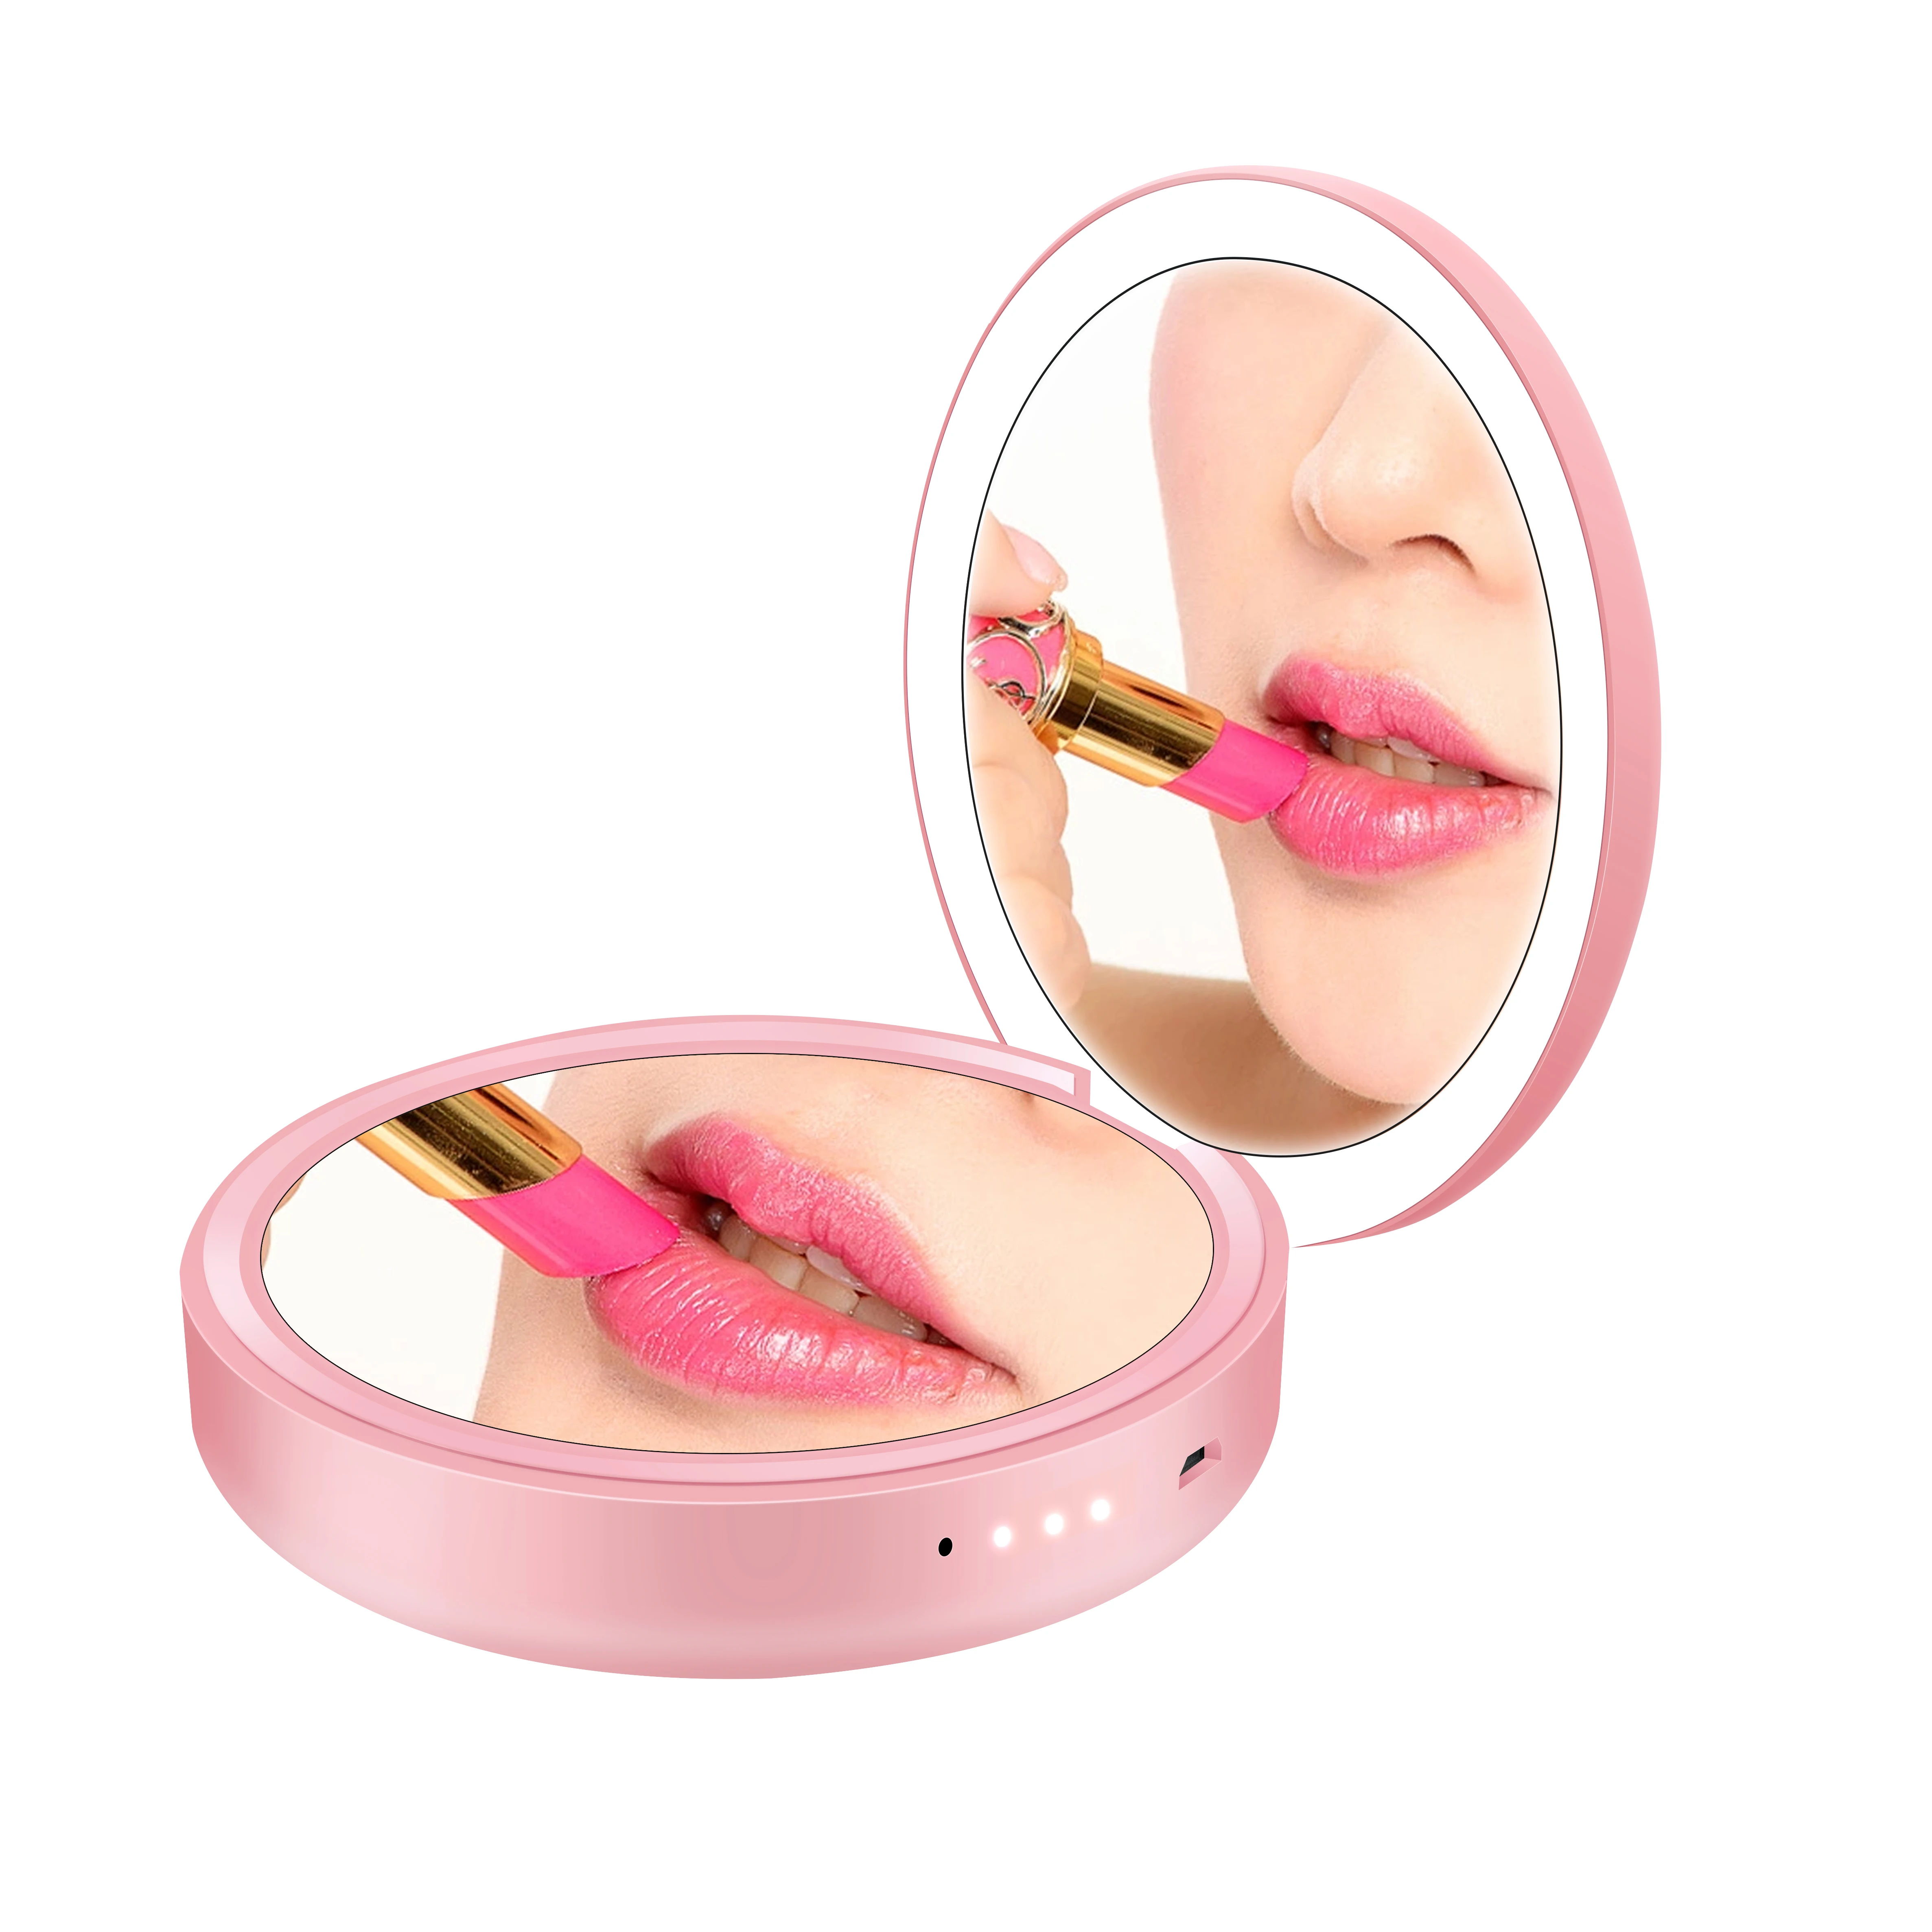 

2020 new products Portable Compact vanity Mirror powerbank Lighted LED with light Power Bank Charger for girl makeup power banks